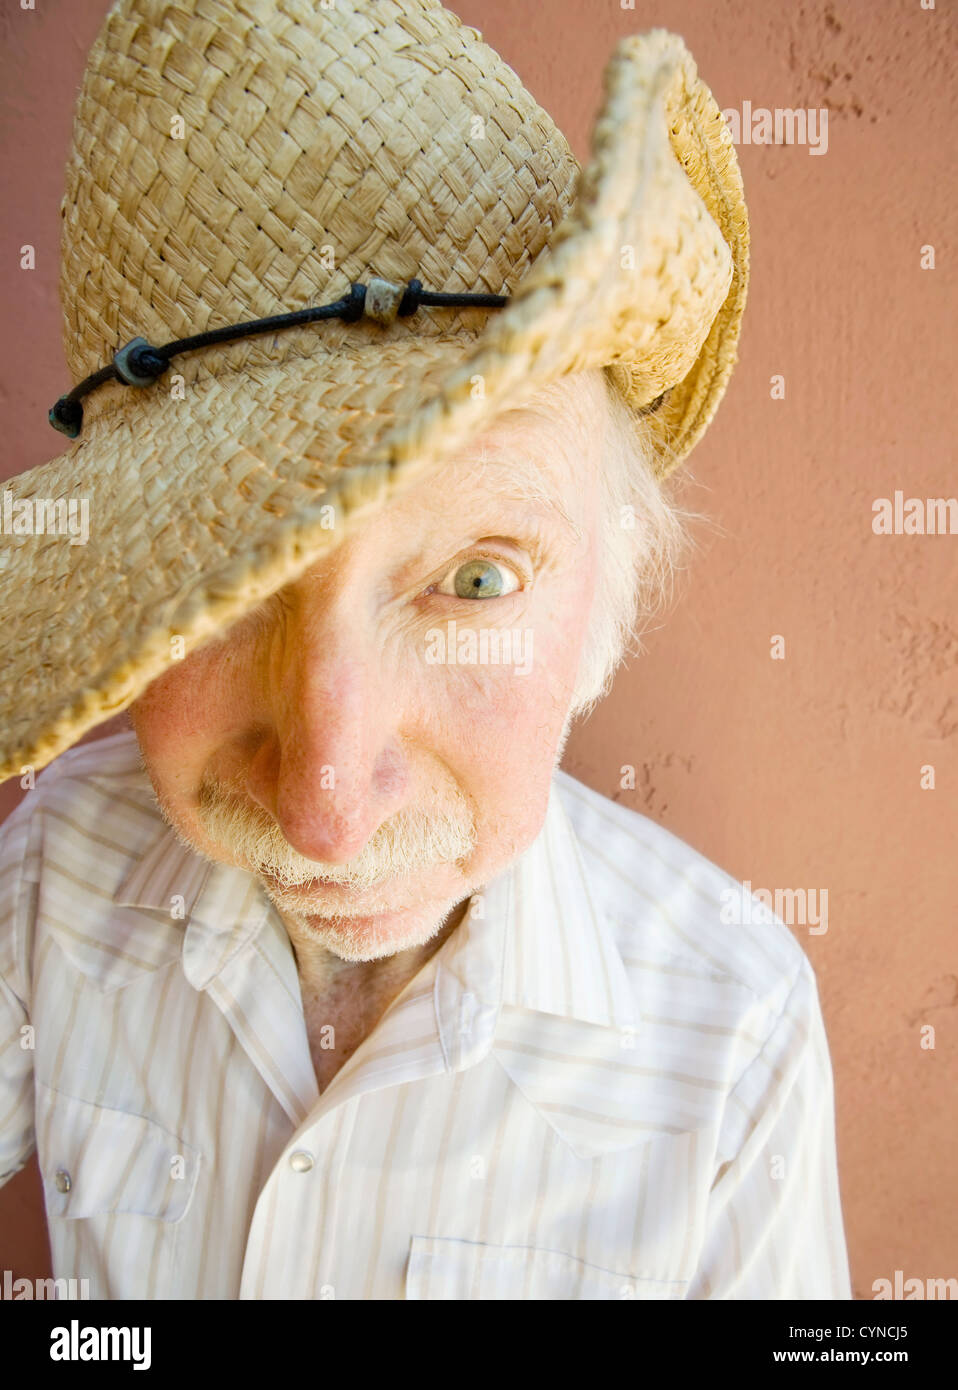 Senior Citizen Man with a Funny Expression Wearing a Straw Cowboy Hat Stock  Photo - Alamy